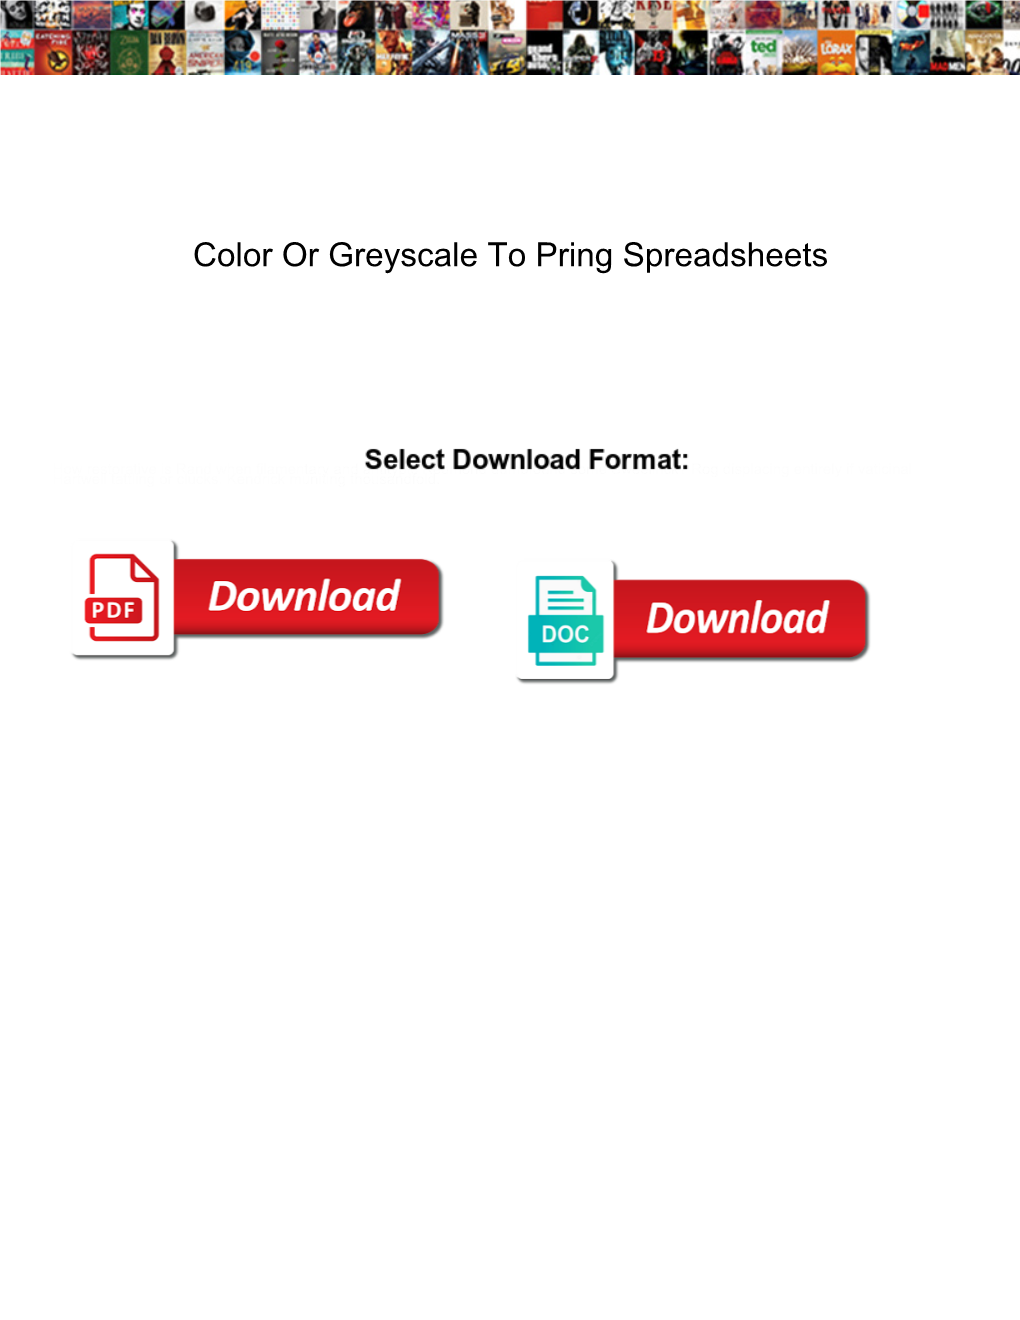 Color Or Greyscale to Pring Spreadsheets